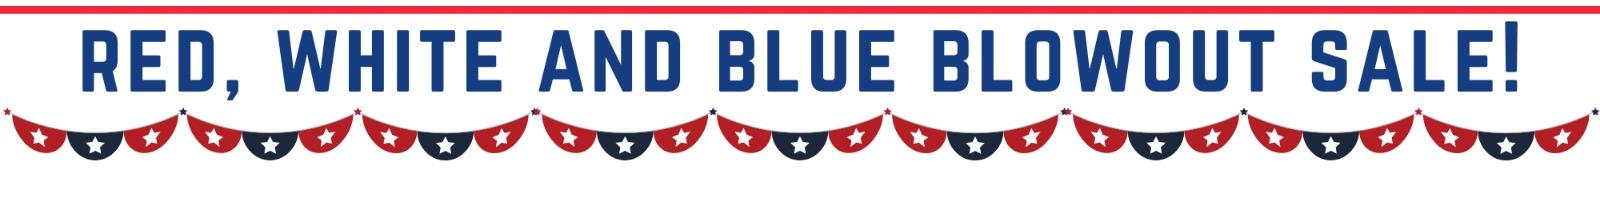 RED, WHITE AND BLUE BLOWOUT SALE!